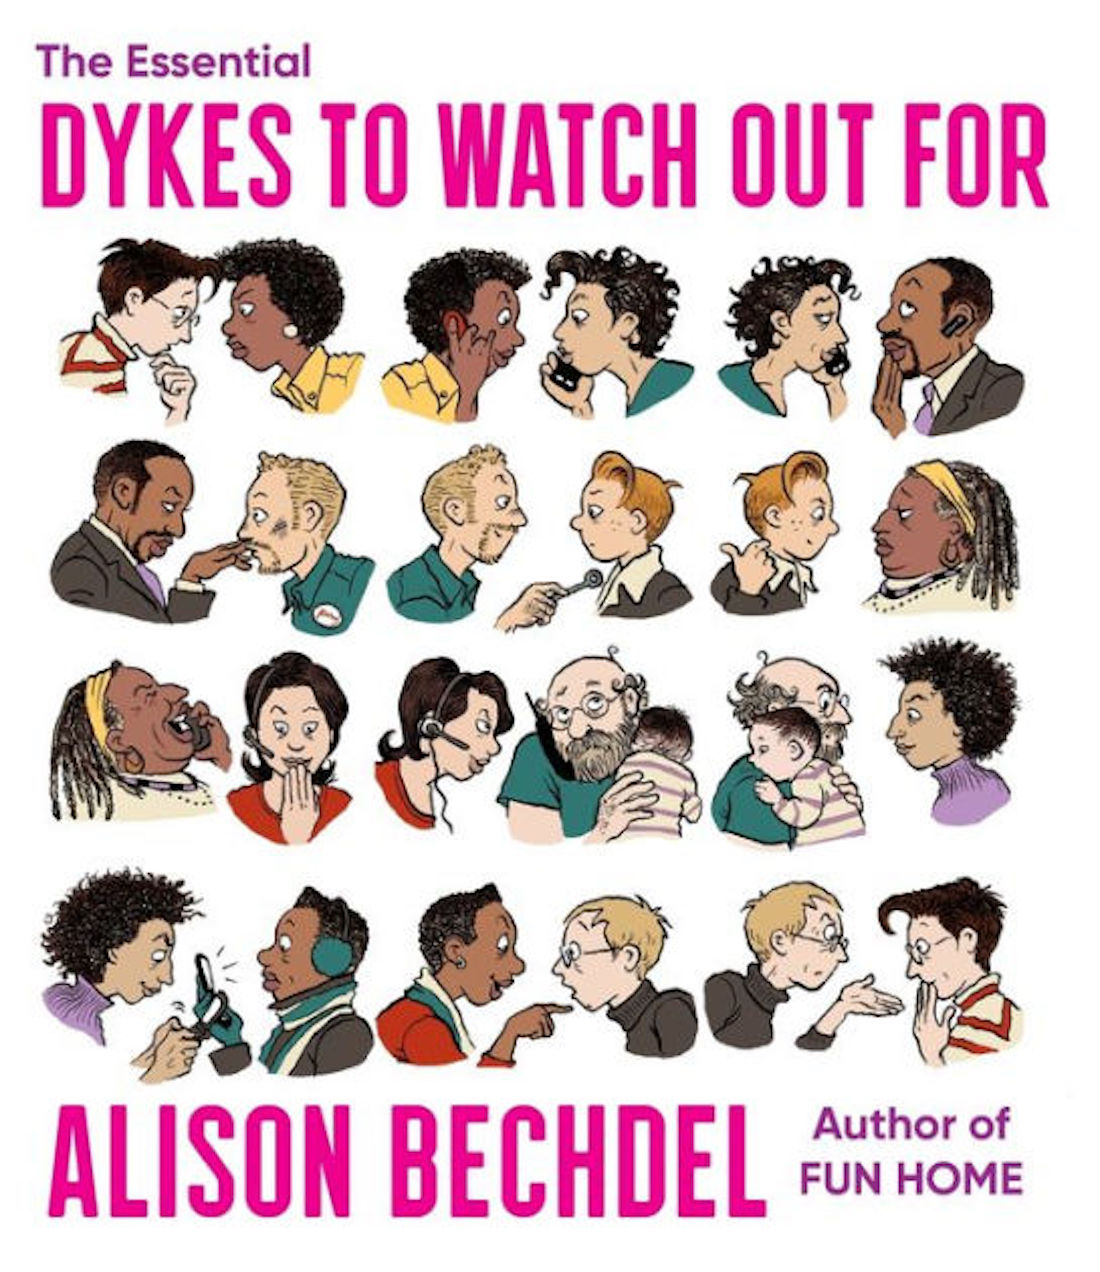 Cover of Alison Bechdel's The Essential Dykes to Watch Out For